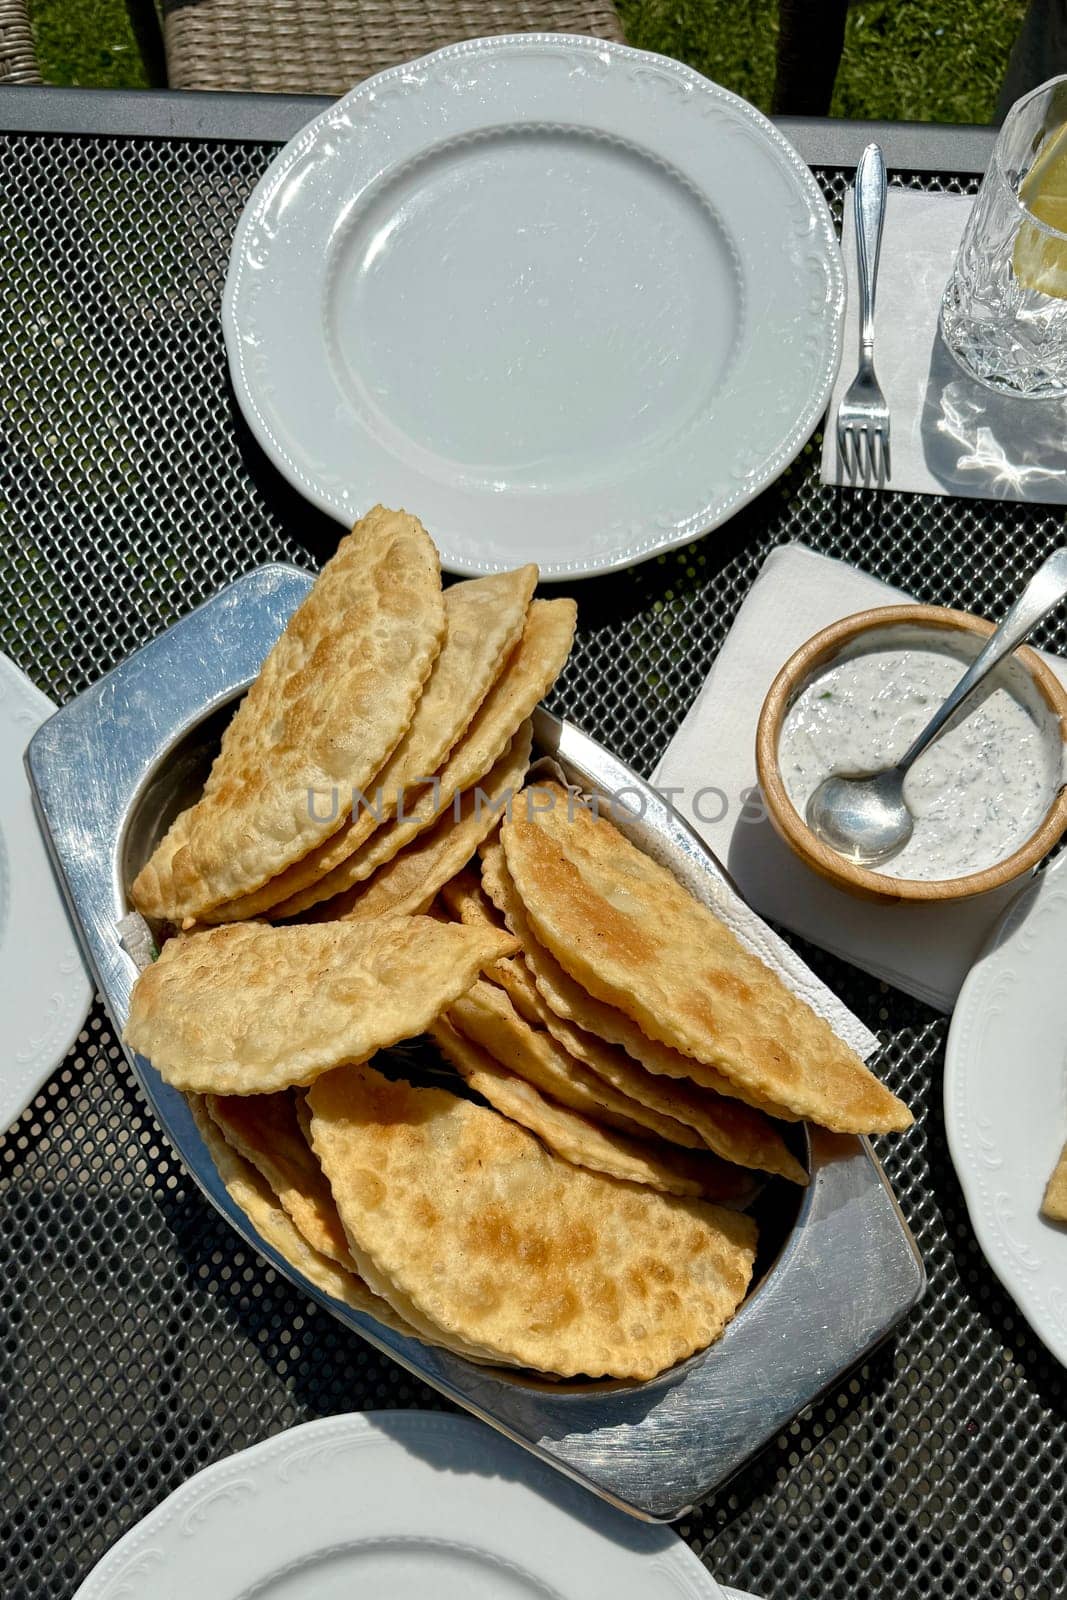 At the picnic, delicious hot chebureks with meat are prepared for tasting by MilaLazo